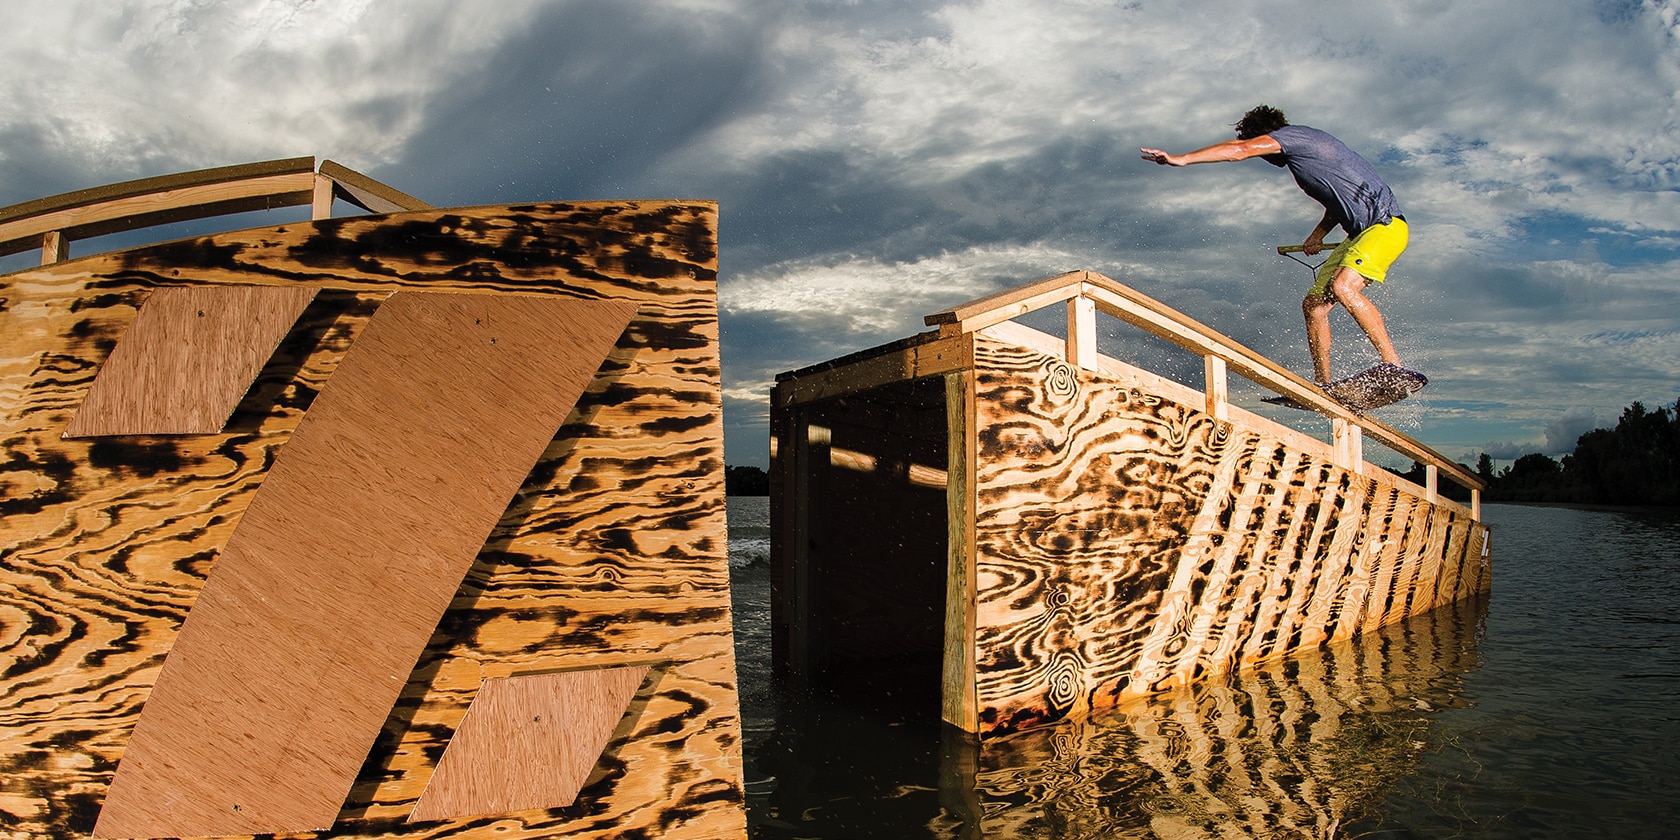 man doing tricks on his wake board on a wooden structure